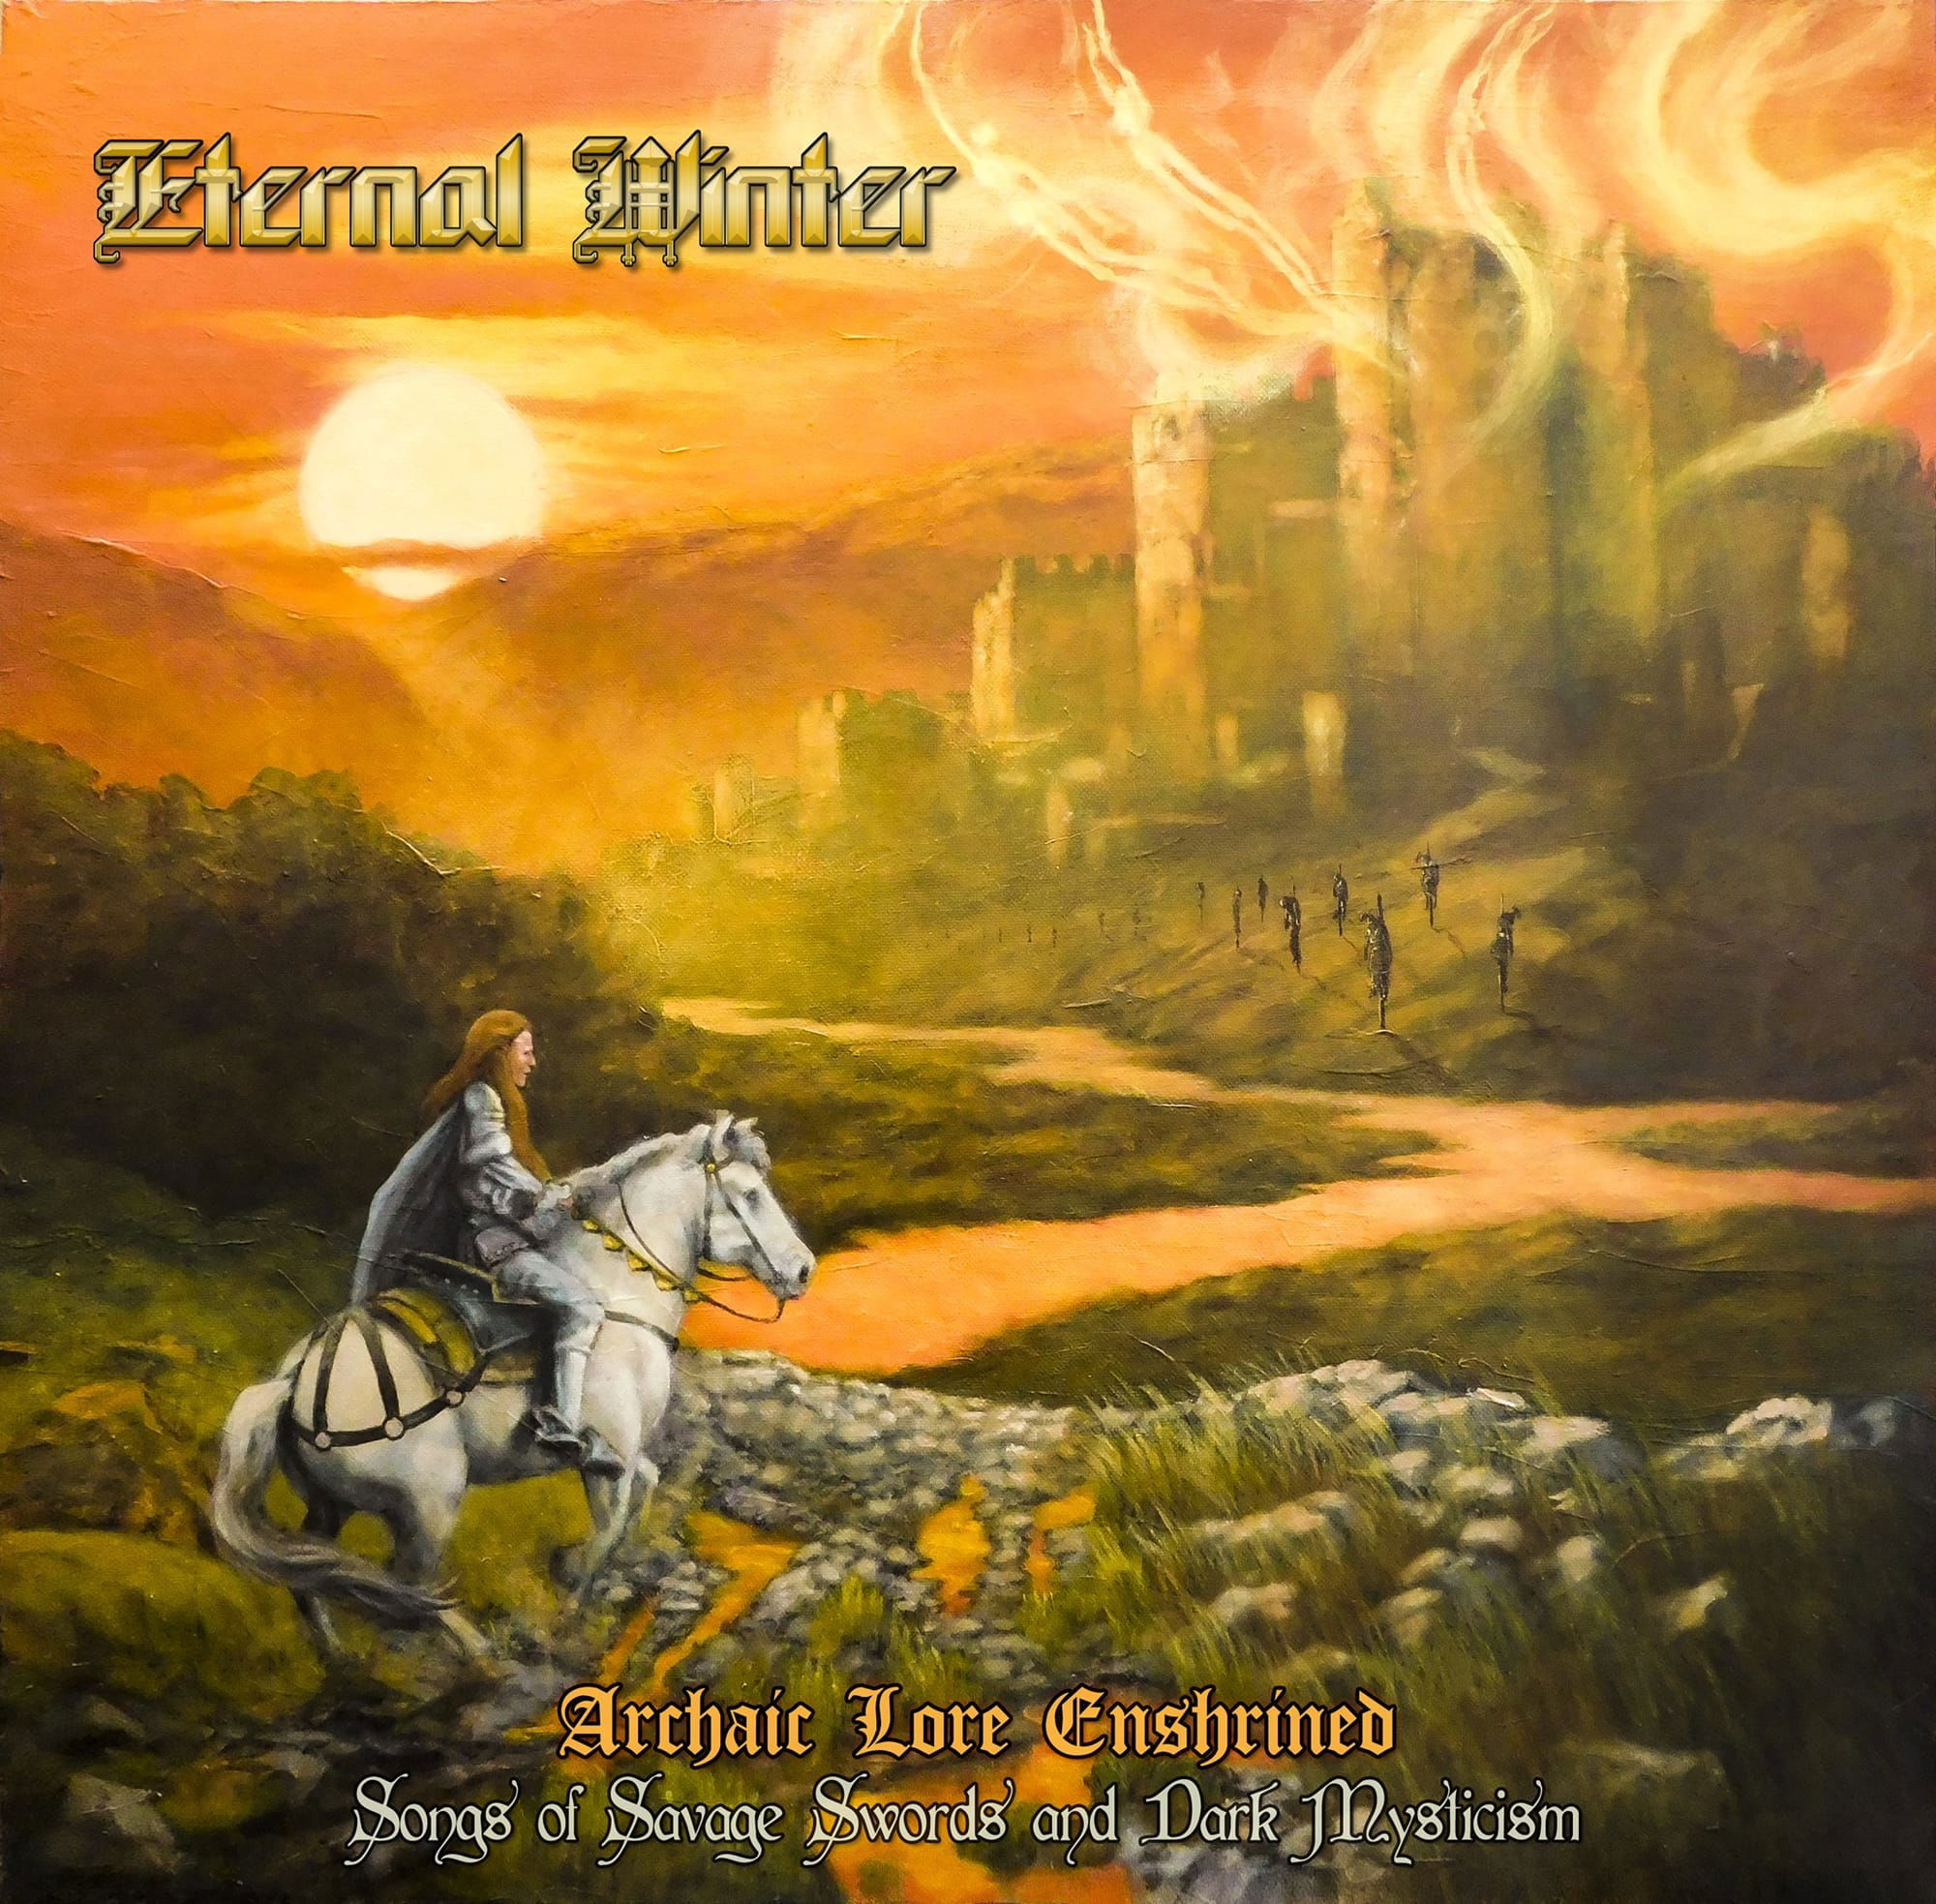 Interview with ETERNAL WINTER